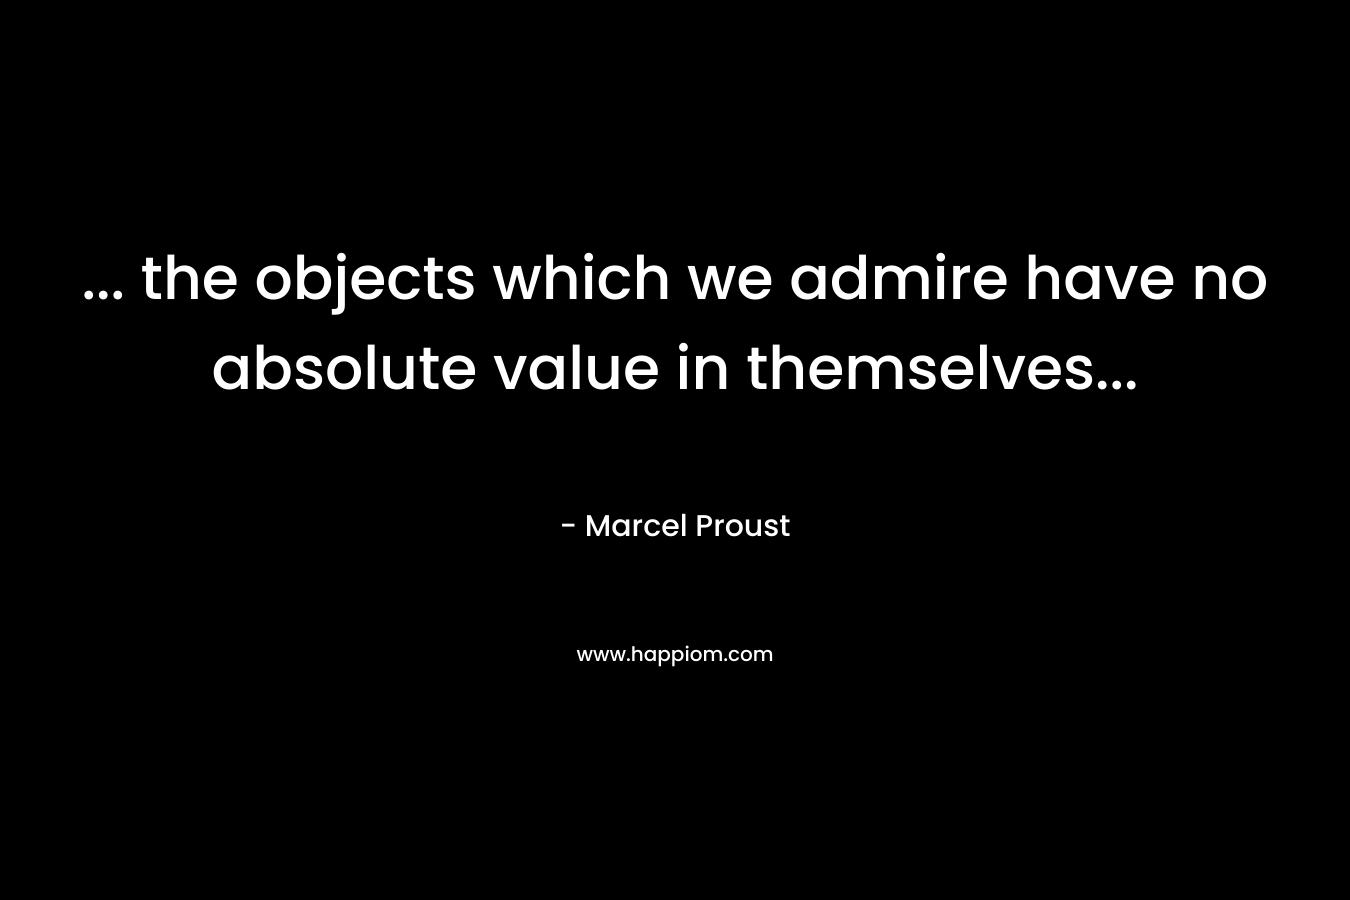 ... the objects which we admire have no absolute value in themselves...